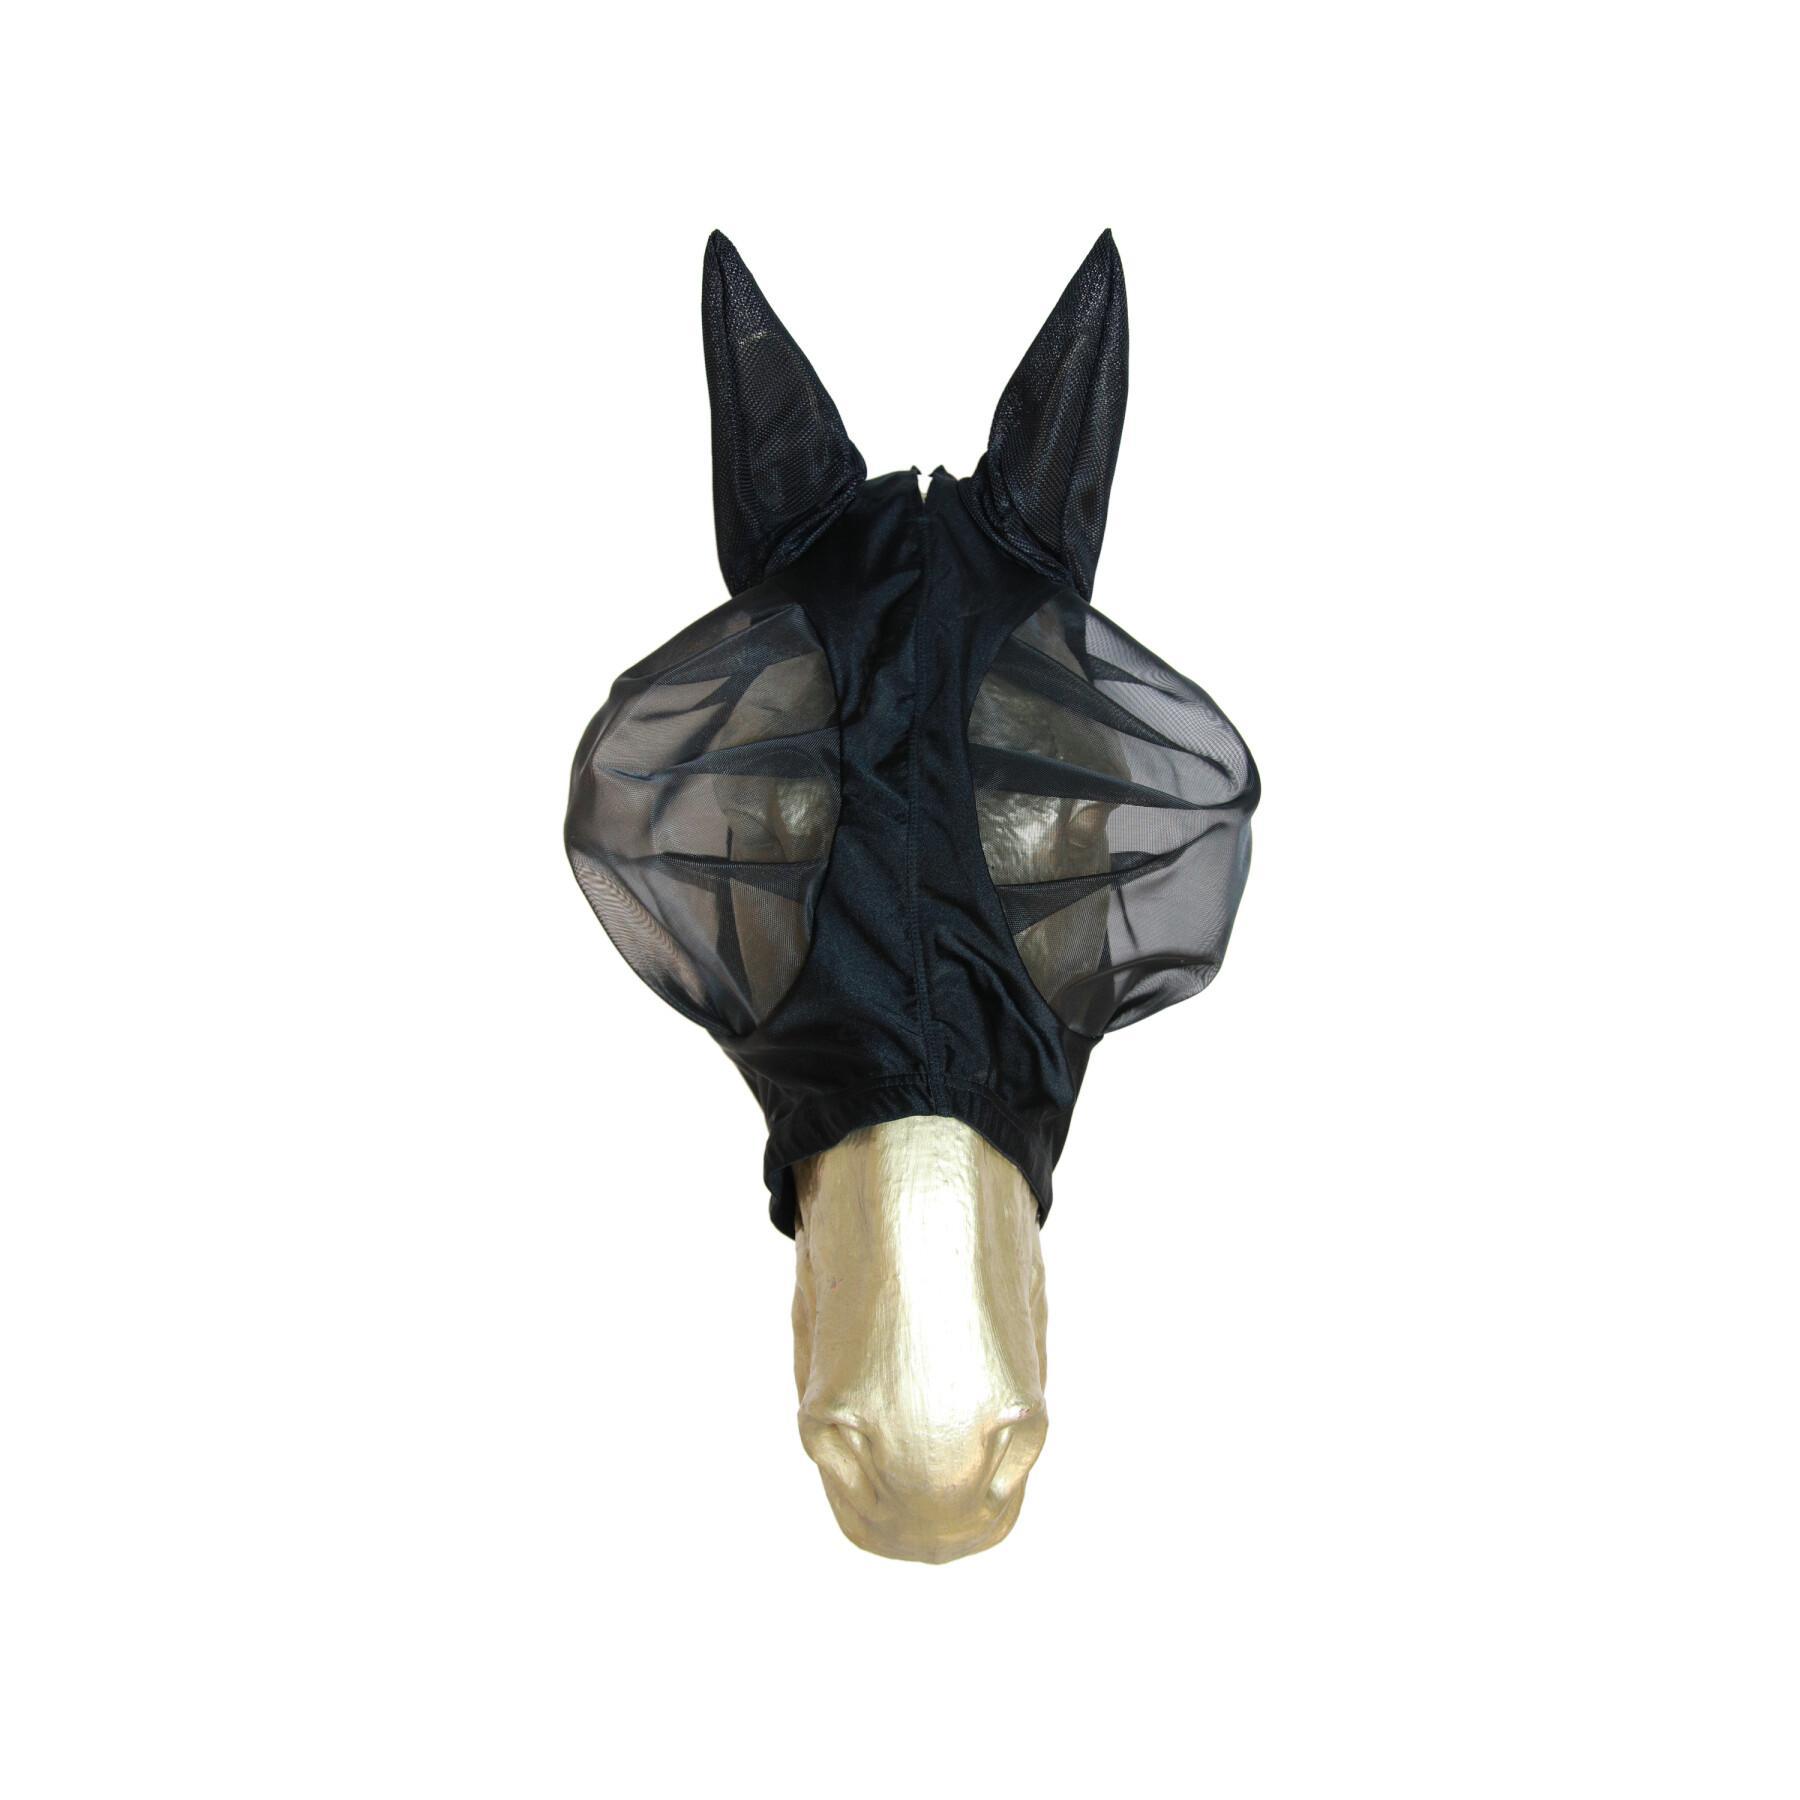 Anti-fly mask for horses Kentucky Slim Fit